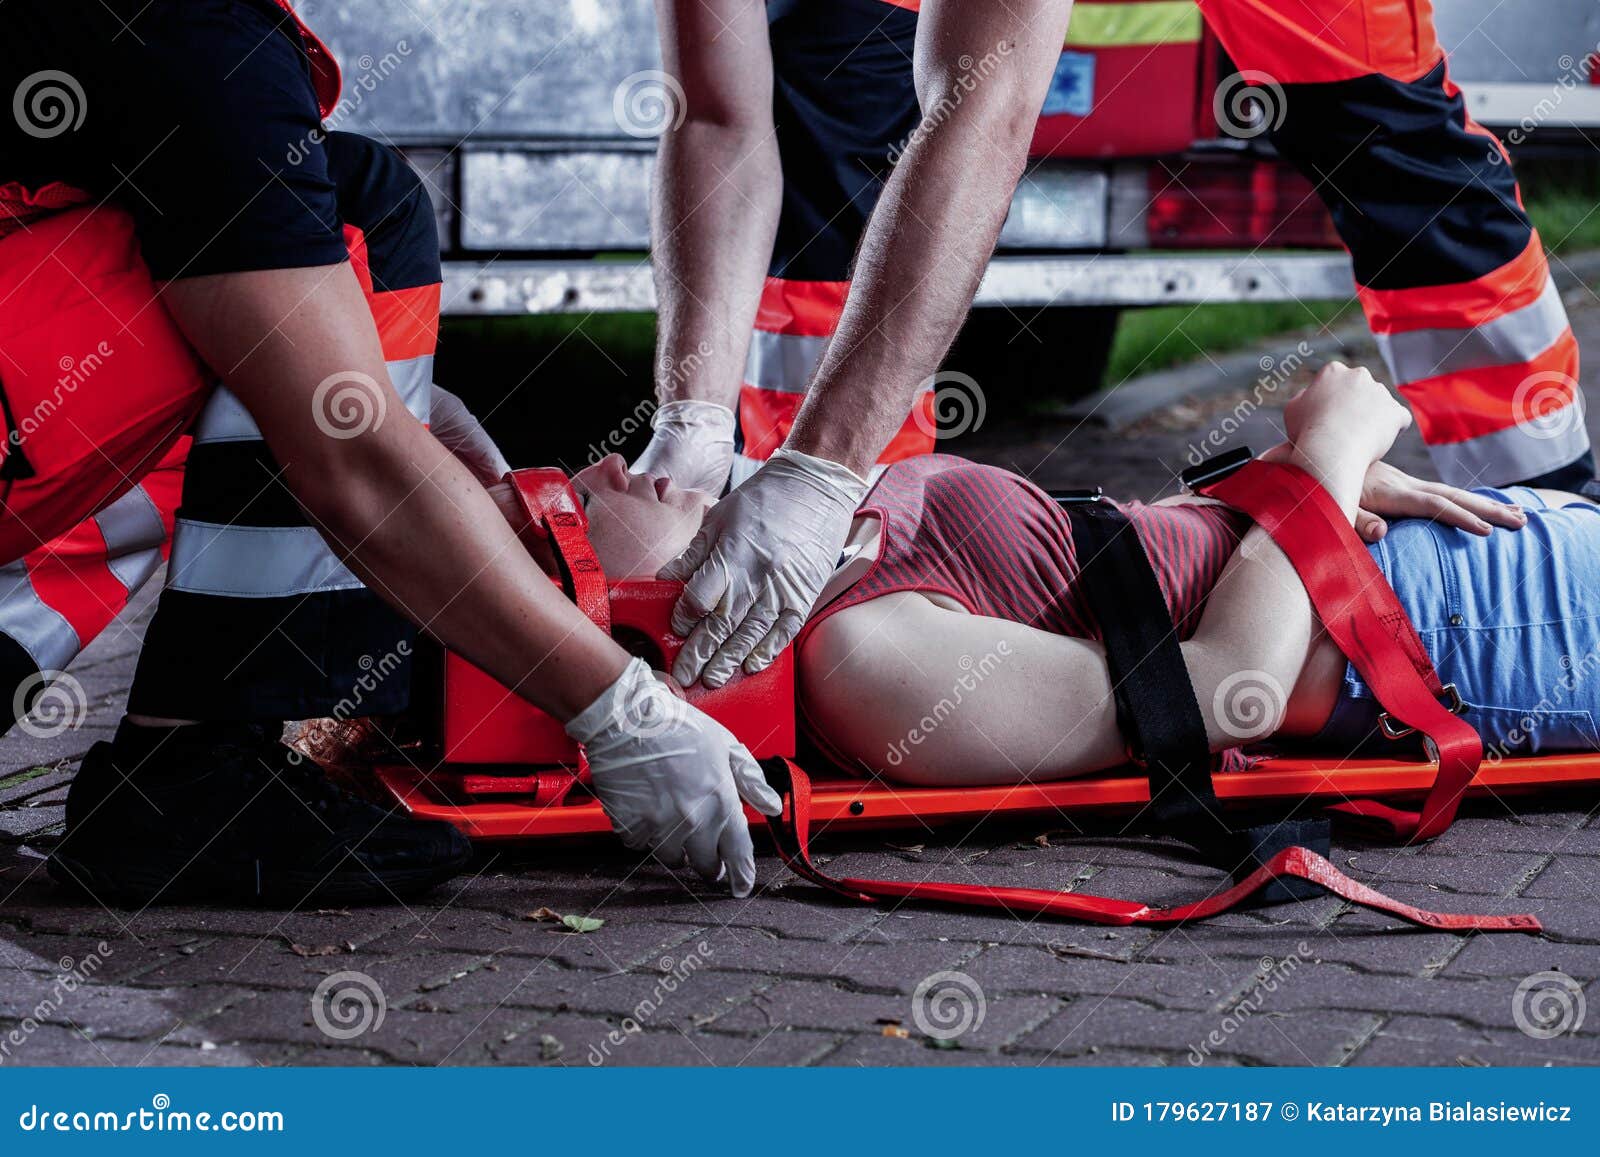 medical rescuer bending over a car accident victim lying on a stretcher